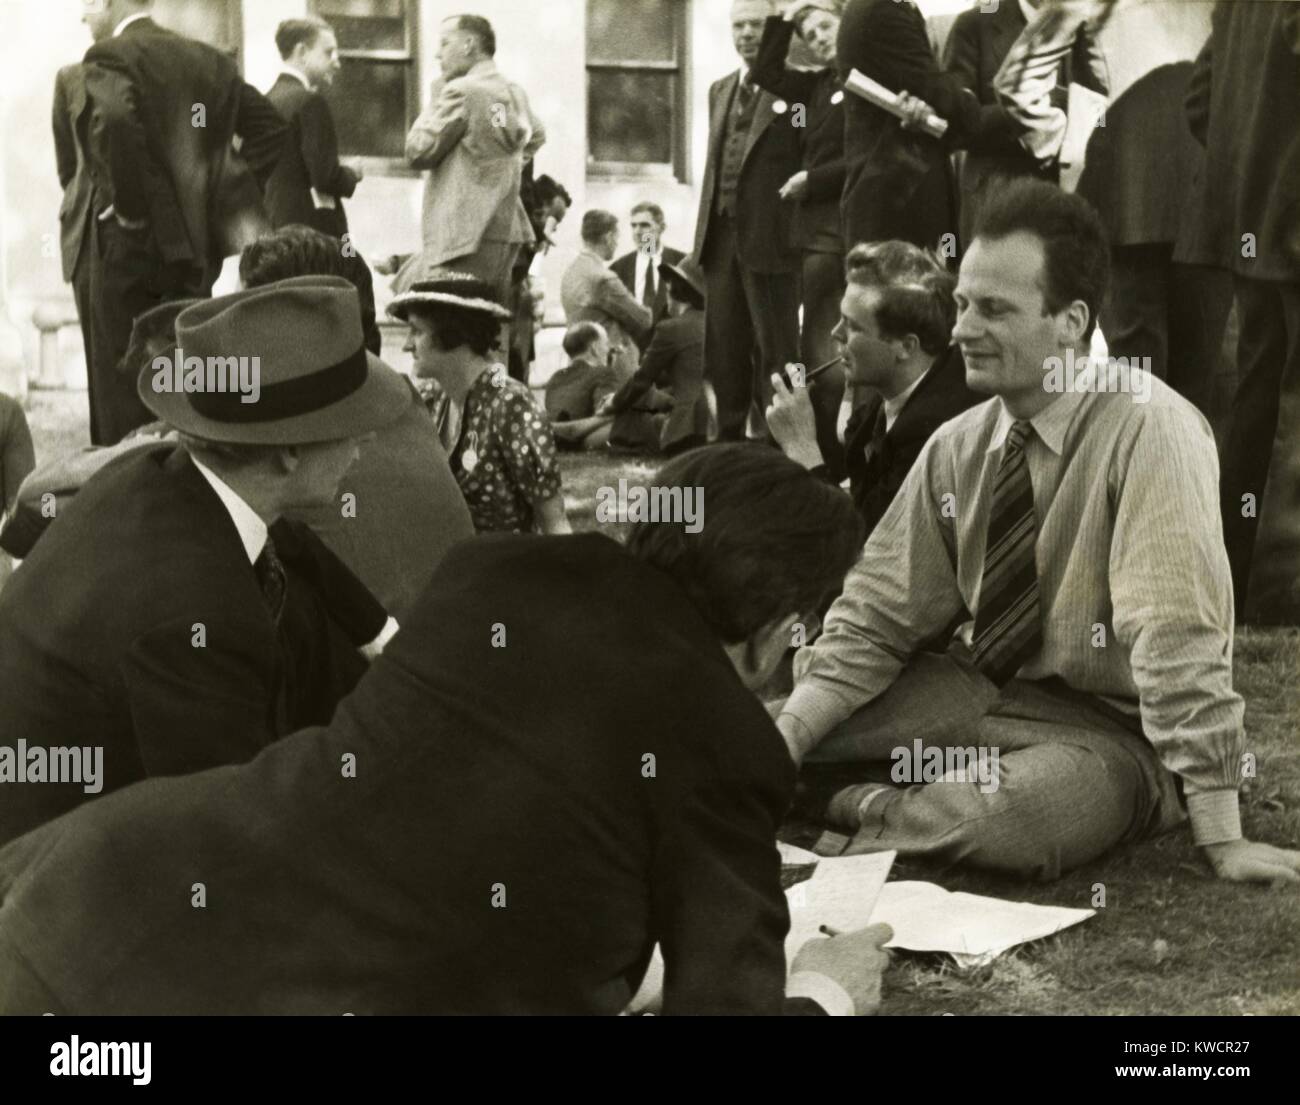 Hans Bethe, being interviewed by journalists in the late 1930s. Bethe, a German-American physicist, would win the 1967 Nobel Prize in physics for his work on the theory of stellar nucleosynthesis. - (BSLOC 2015 1 65) Stock Photo